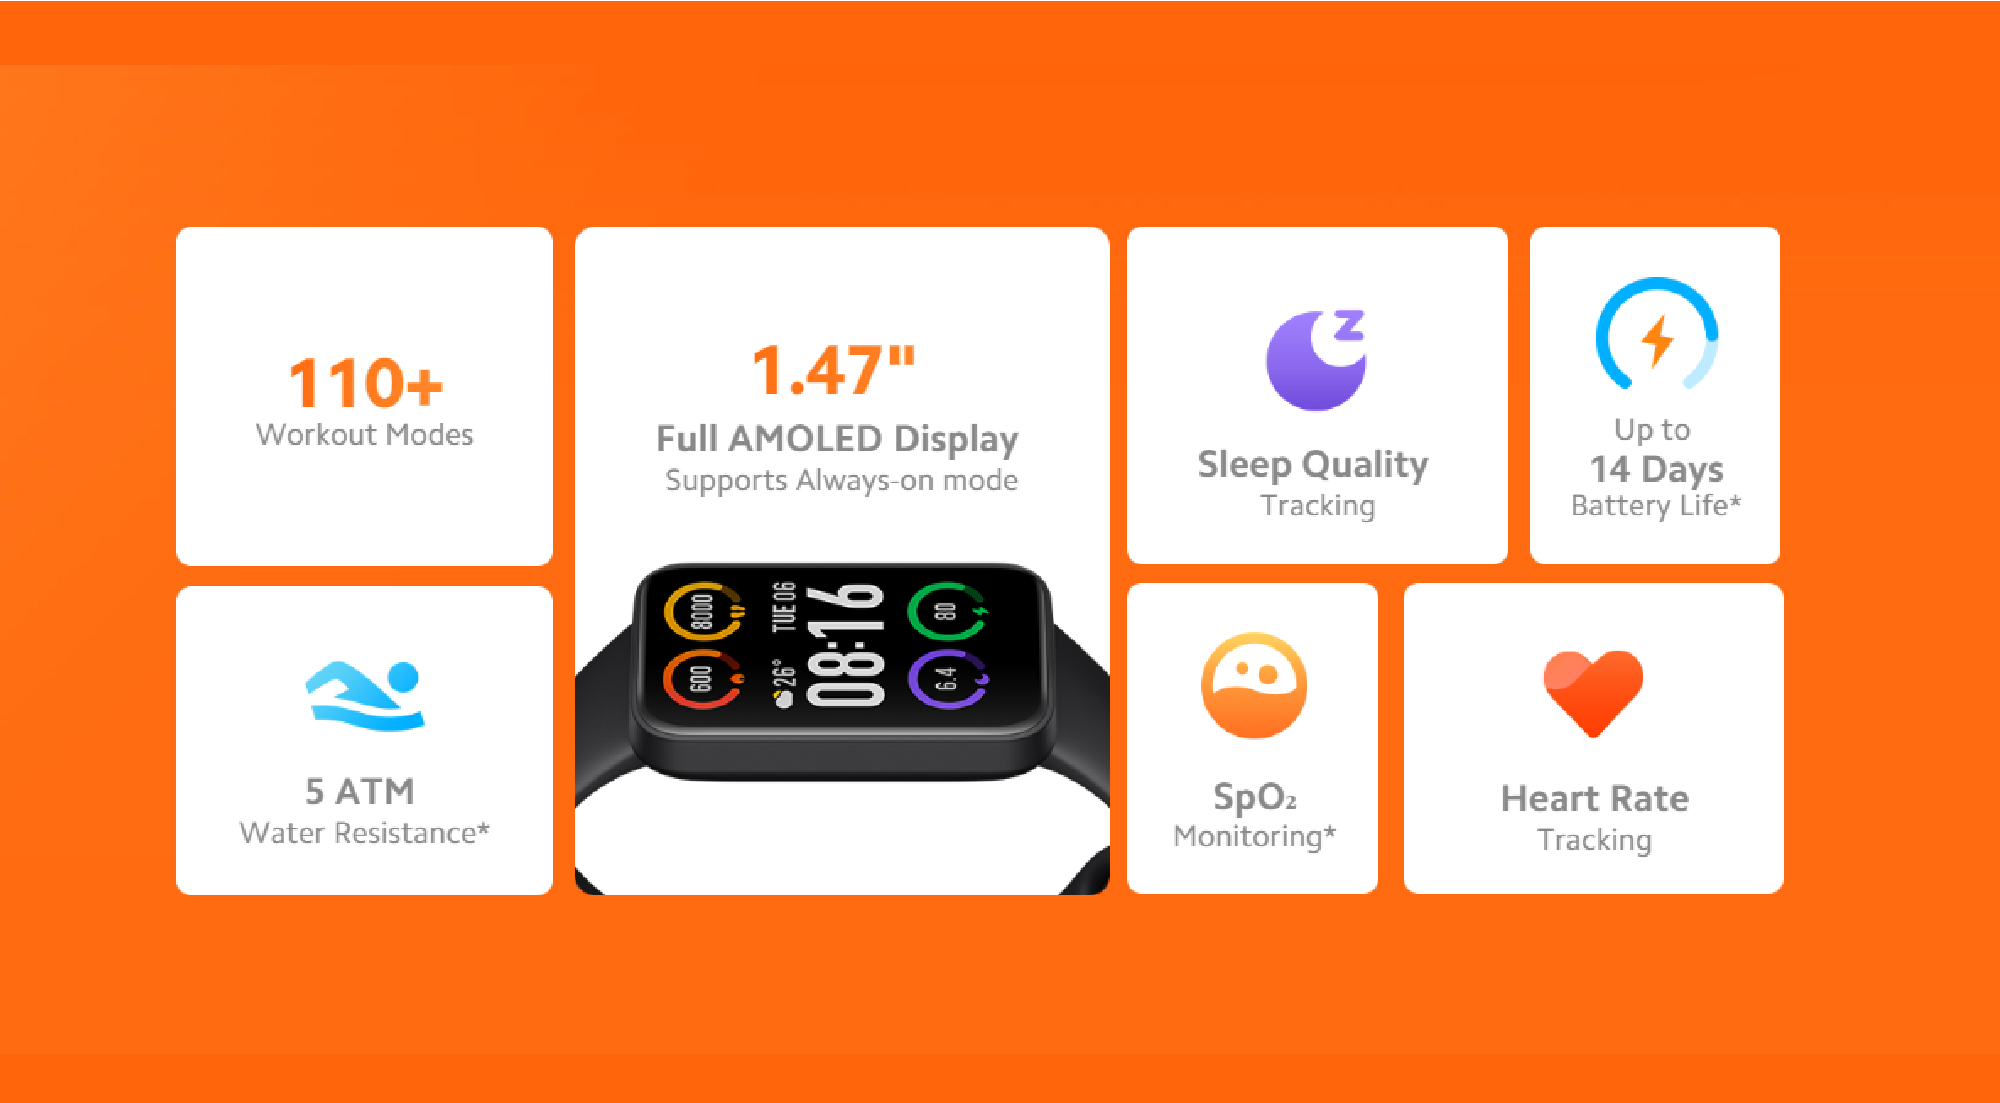 Xiaomi Redmi Smart Band Pro: Black with 1.47" AMOLED Display, 110+ Sports Modes, Heart Rate Monitor, Sleep Tracker, and Up to 14 Days of Battery Life